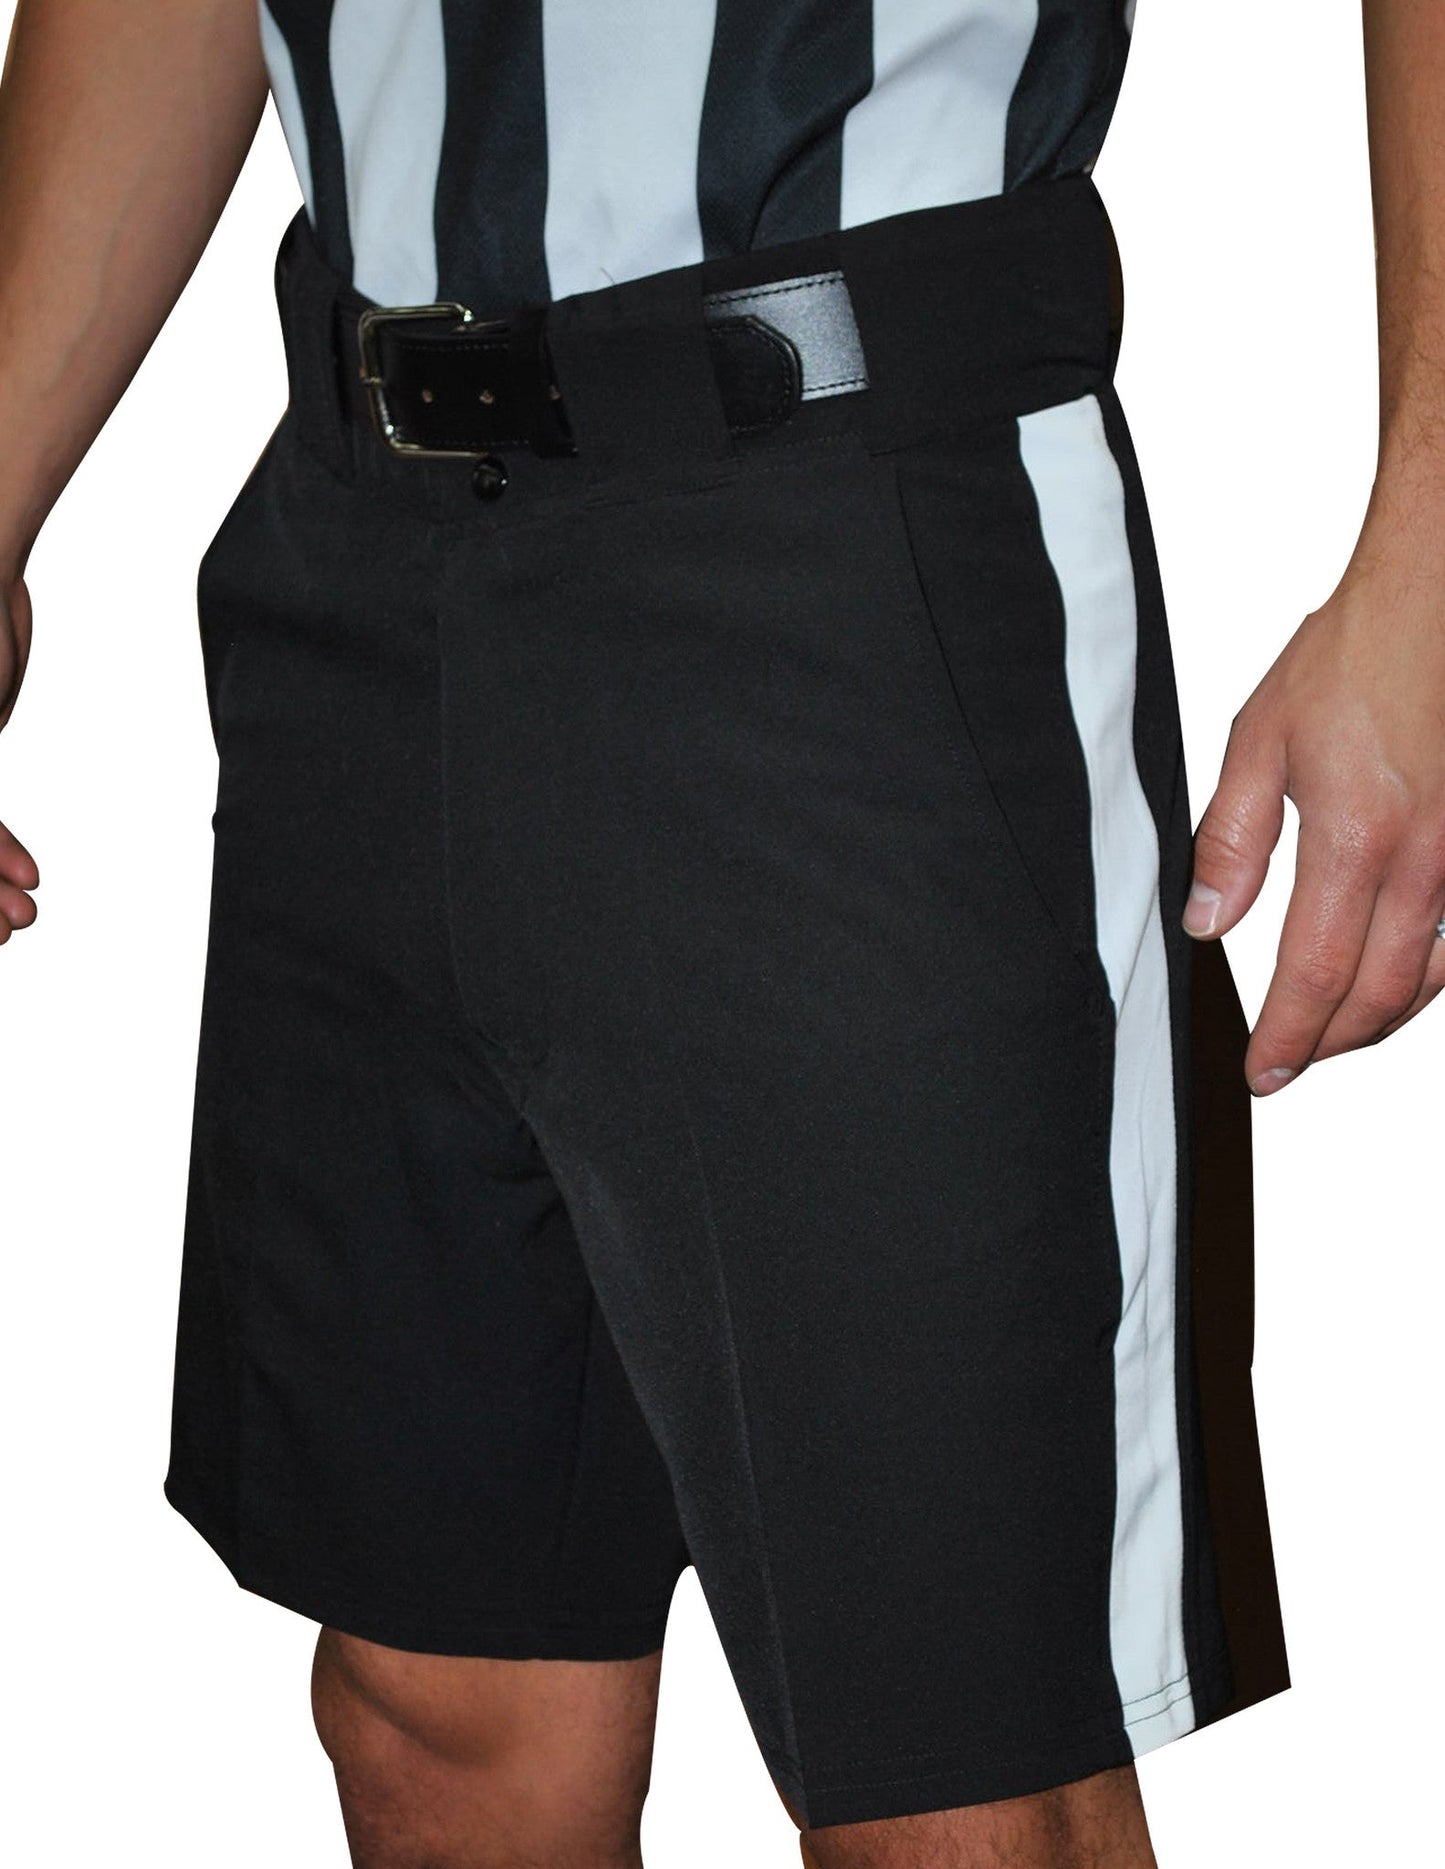 FBS181-Smitty Premium Knit Polyester Football Shorts with Non-Slip Silicone Gripper Waistband - 1 1/4" White Stripe